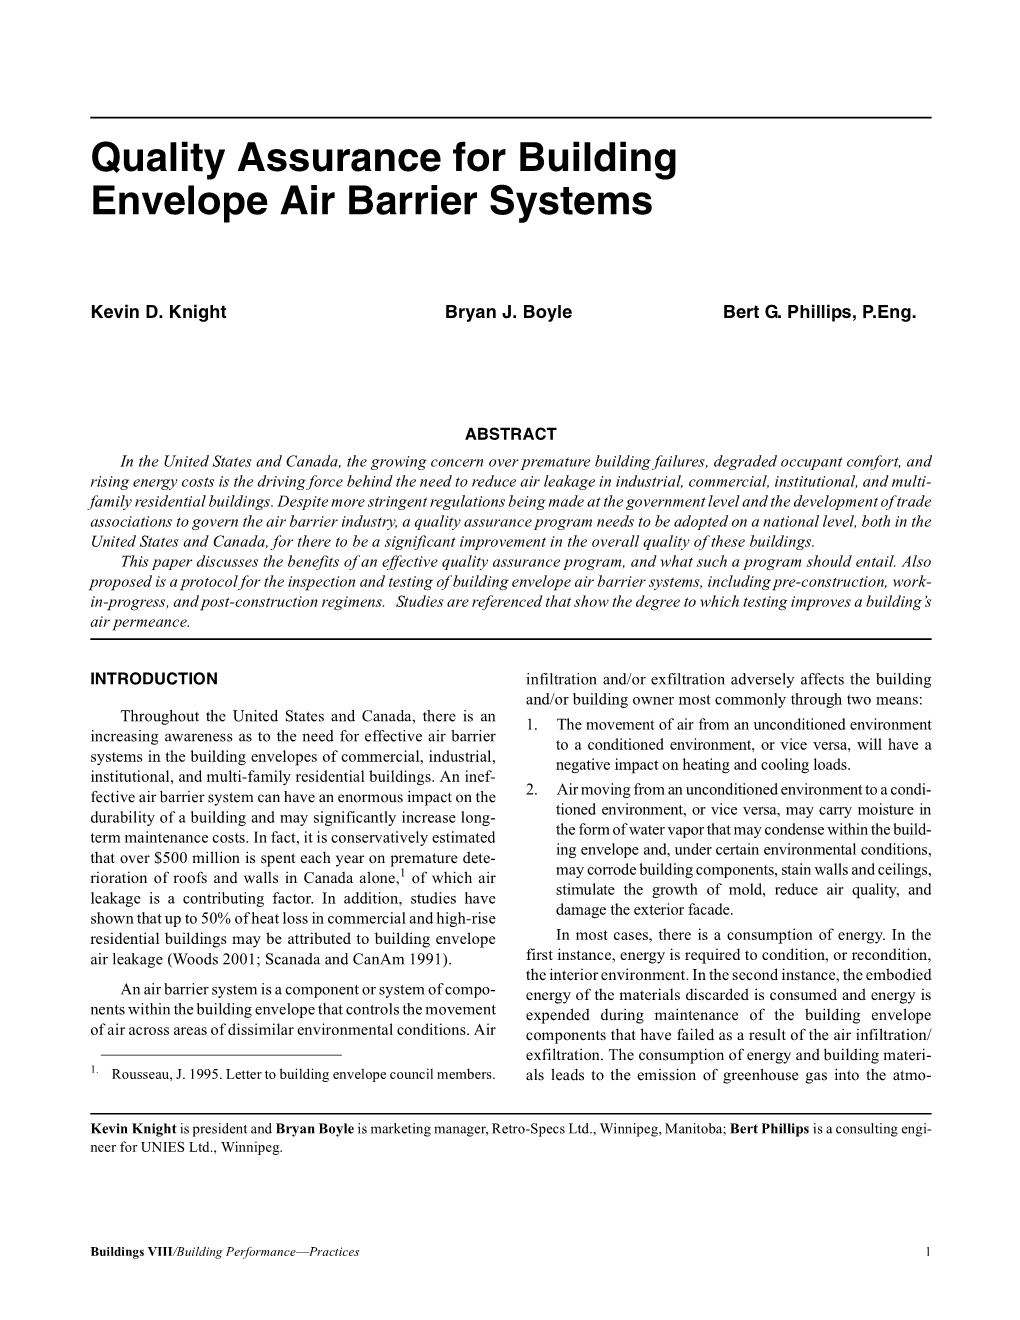 Quality Assurance for Building Envelope Air Barrier Systems